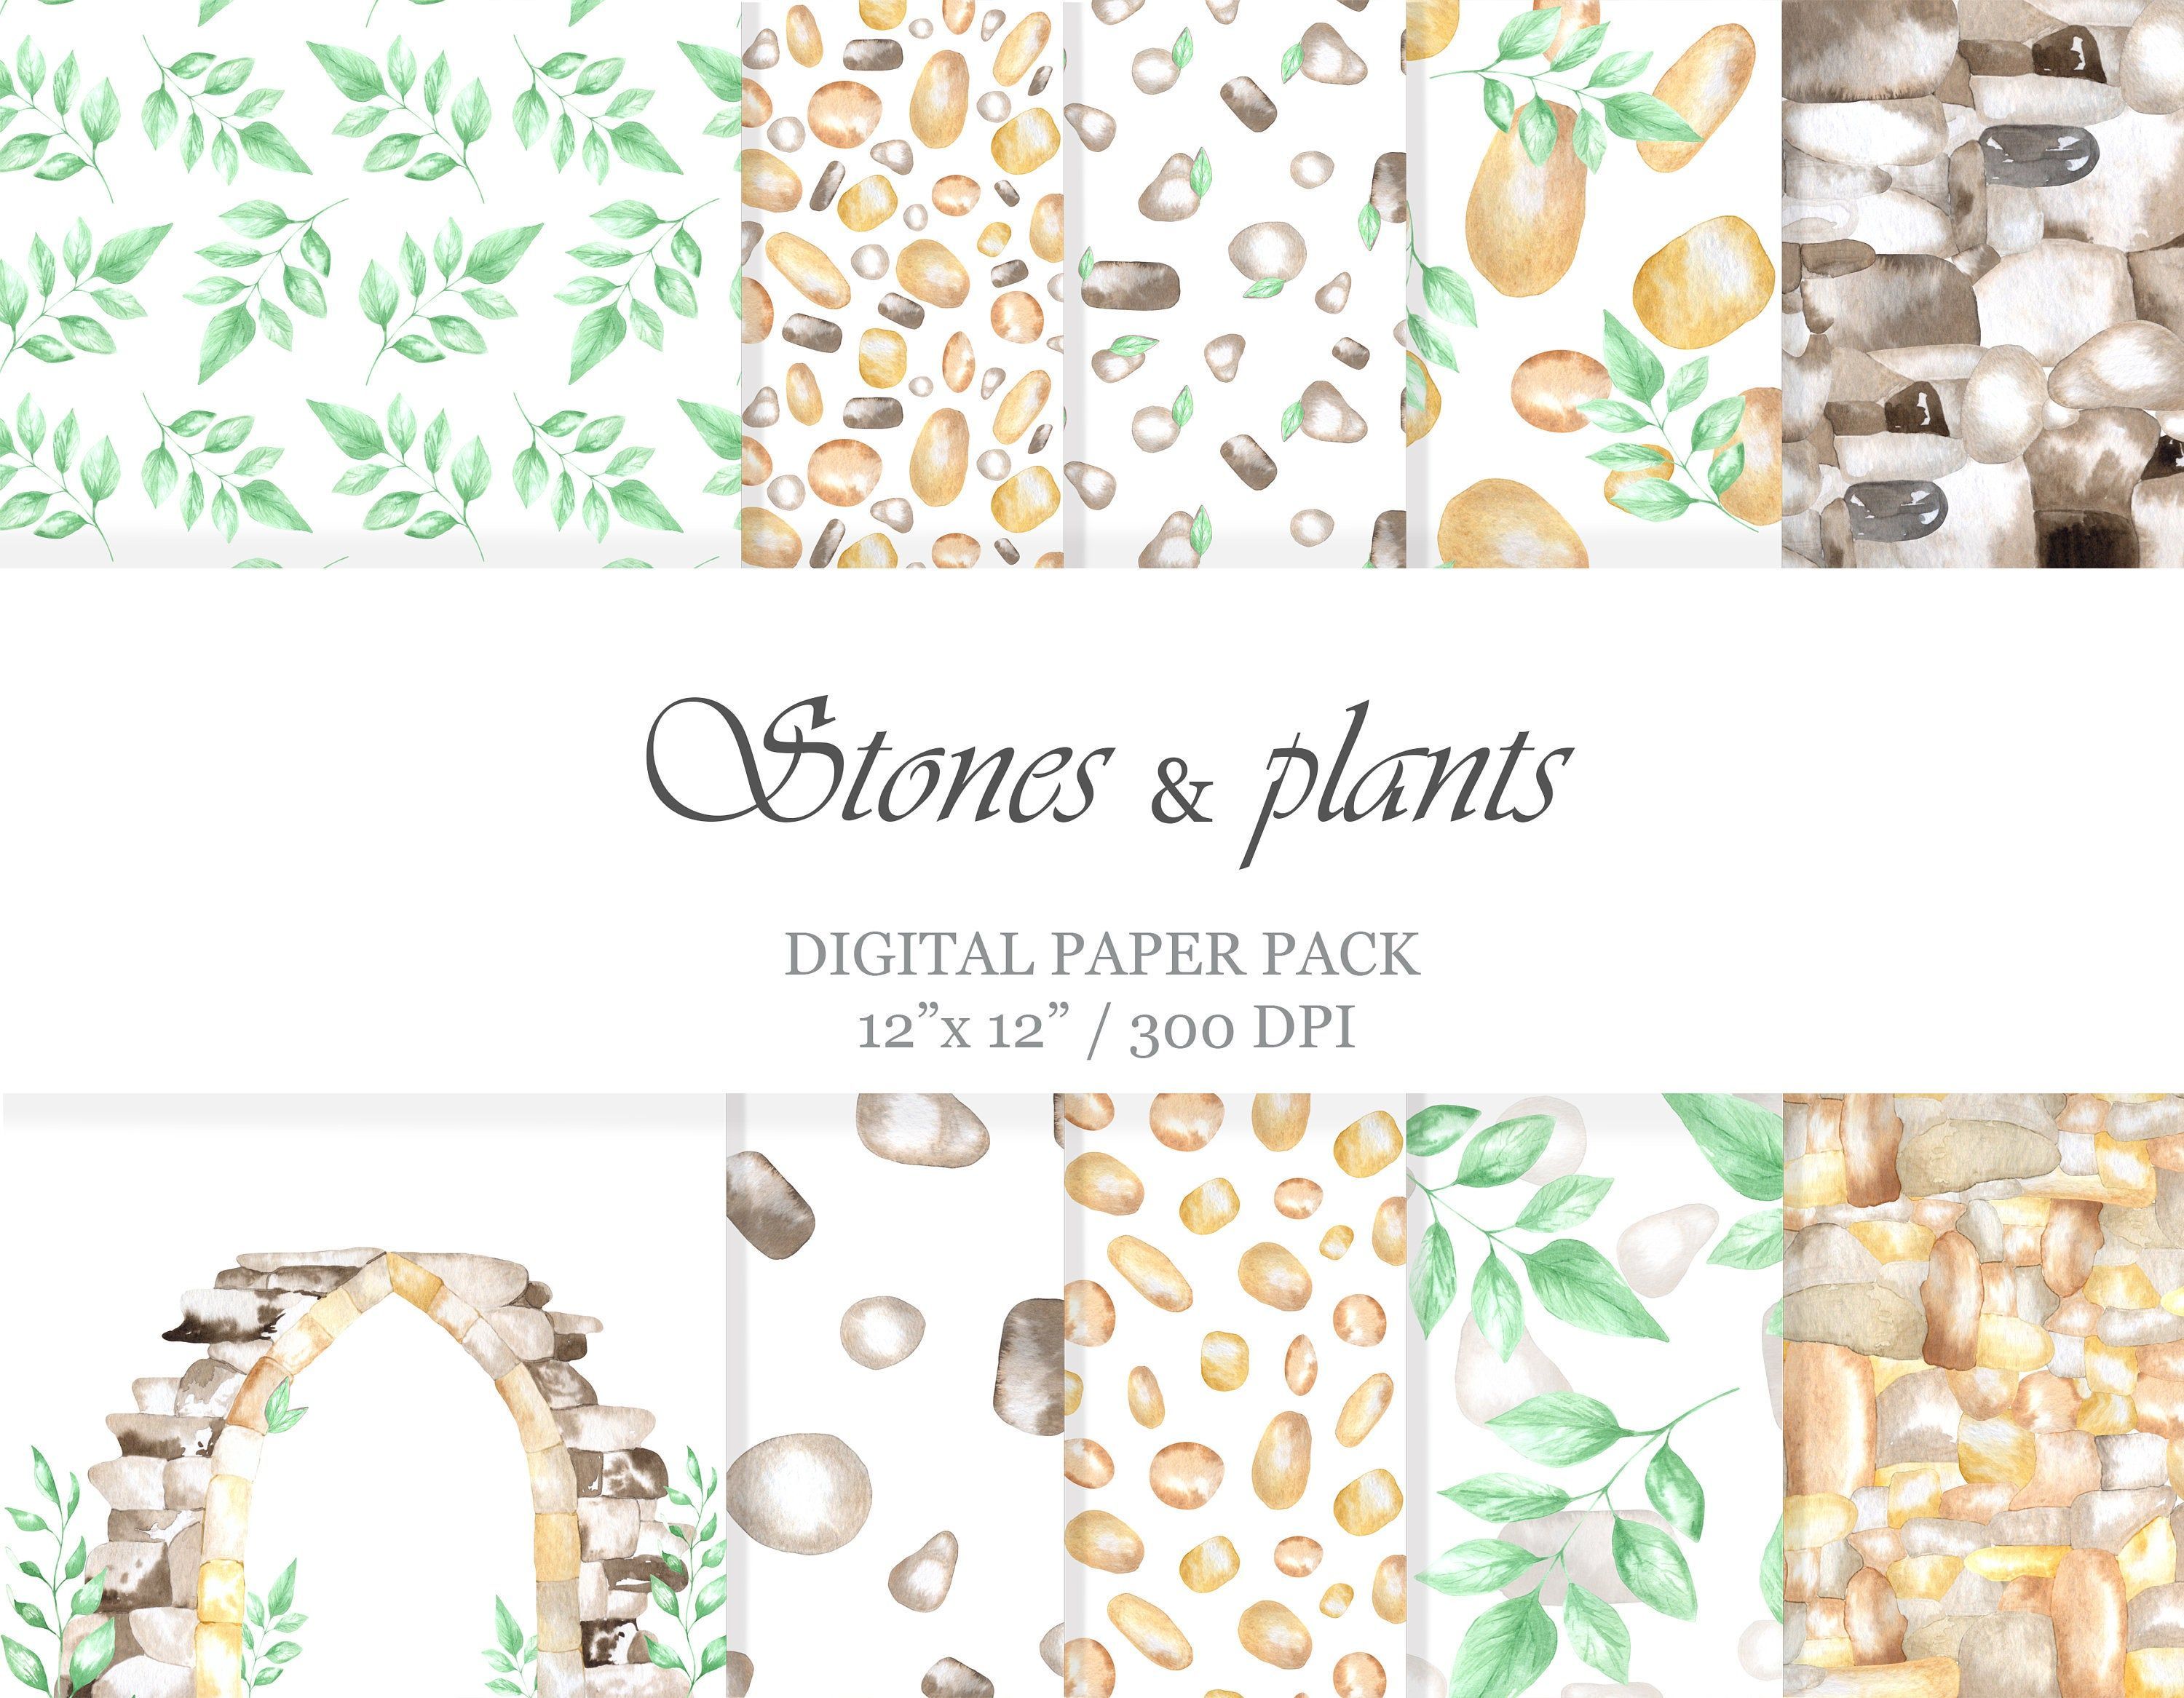 Stones and plants watercolor digital paper.Stone patterns.Stone,floral seamless background,digital wallpaper for instant download.JPEG -   15 plants Watercolor pattern ideas